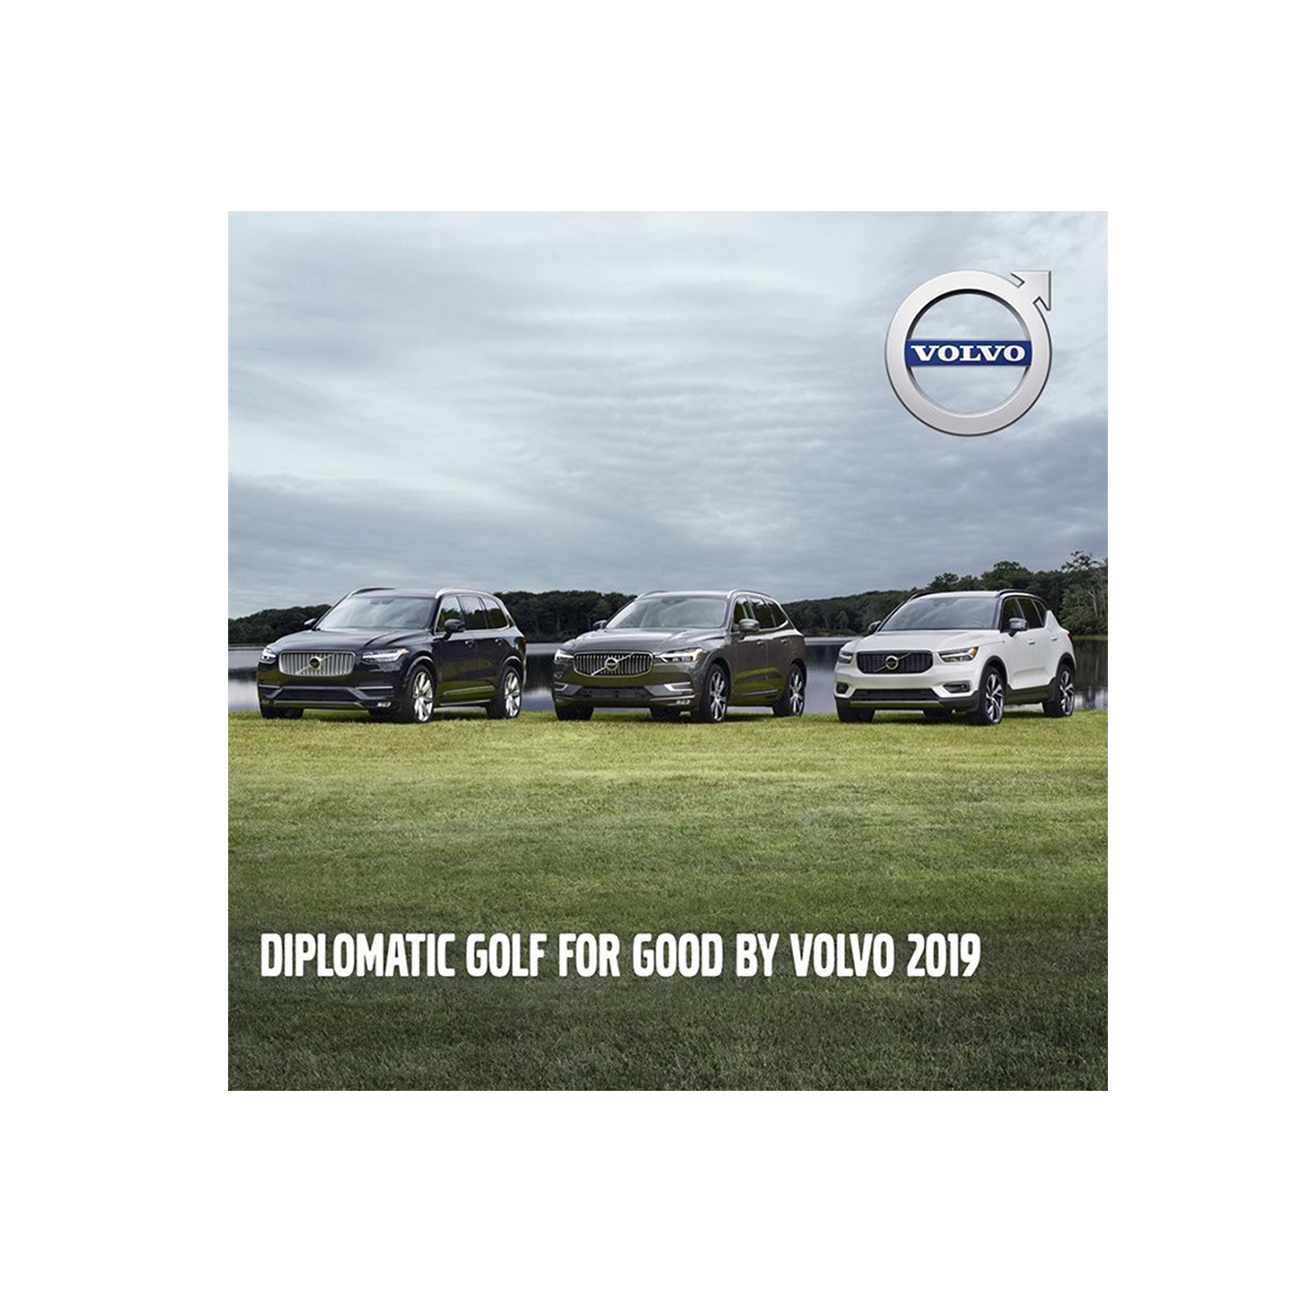 The official importer of Volvo cars in Ukraine joins the development of sports golf and will be the main sponsor of the international golf tournamen